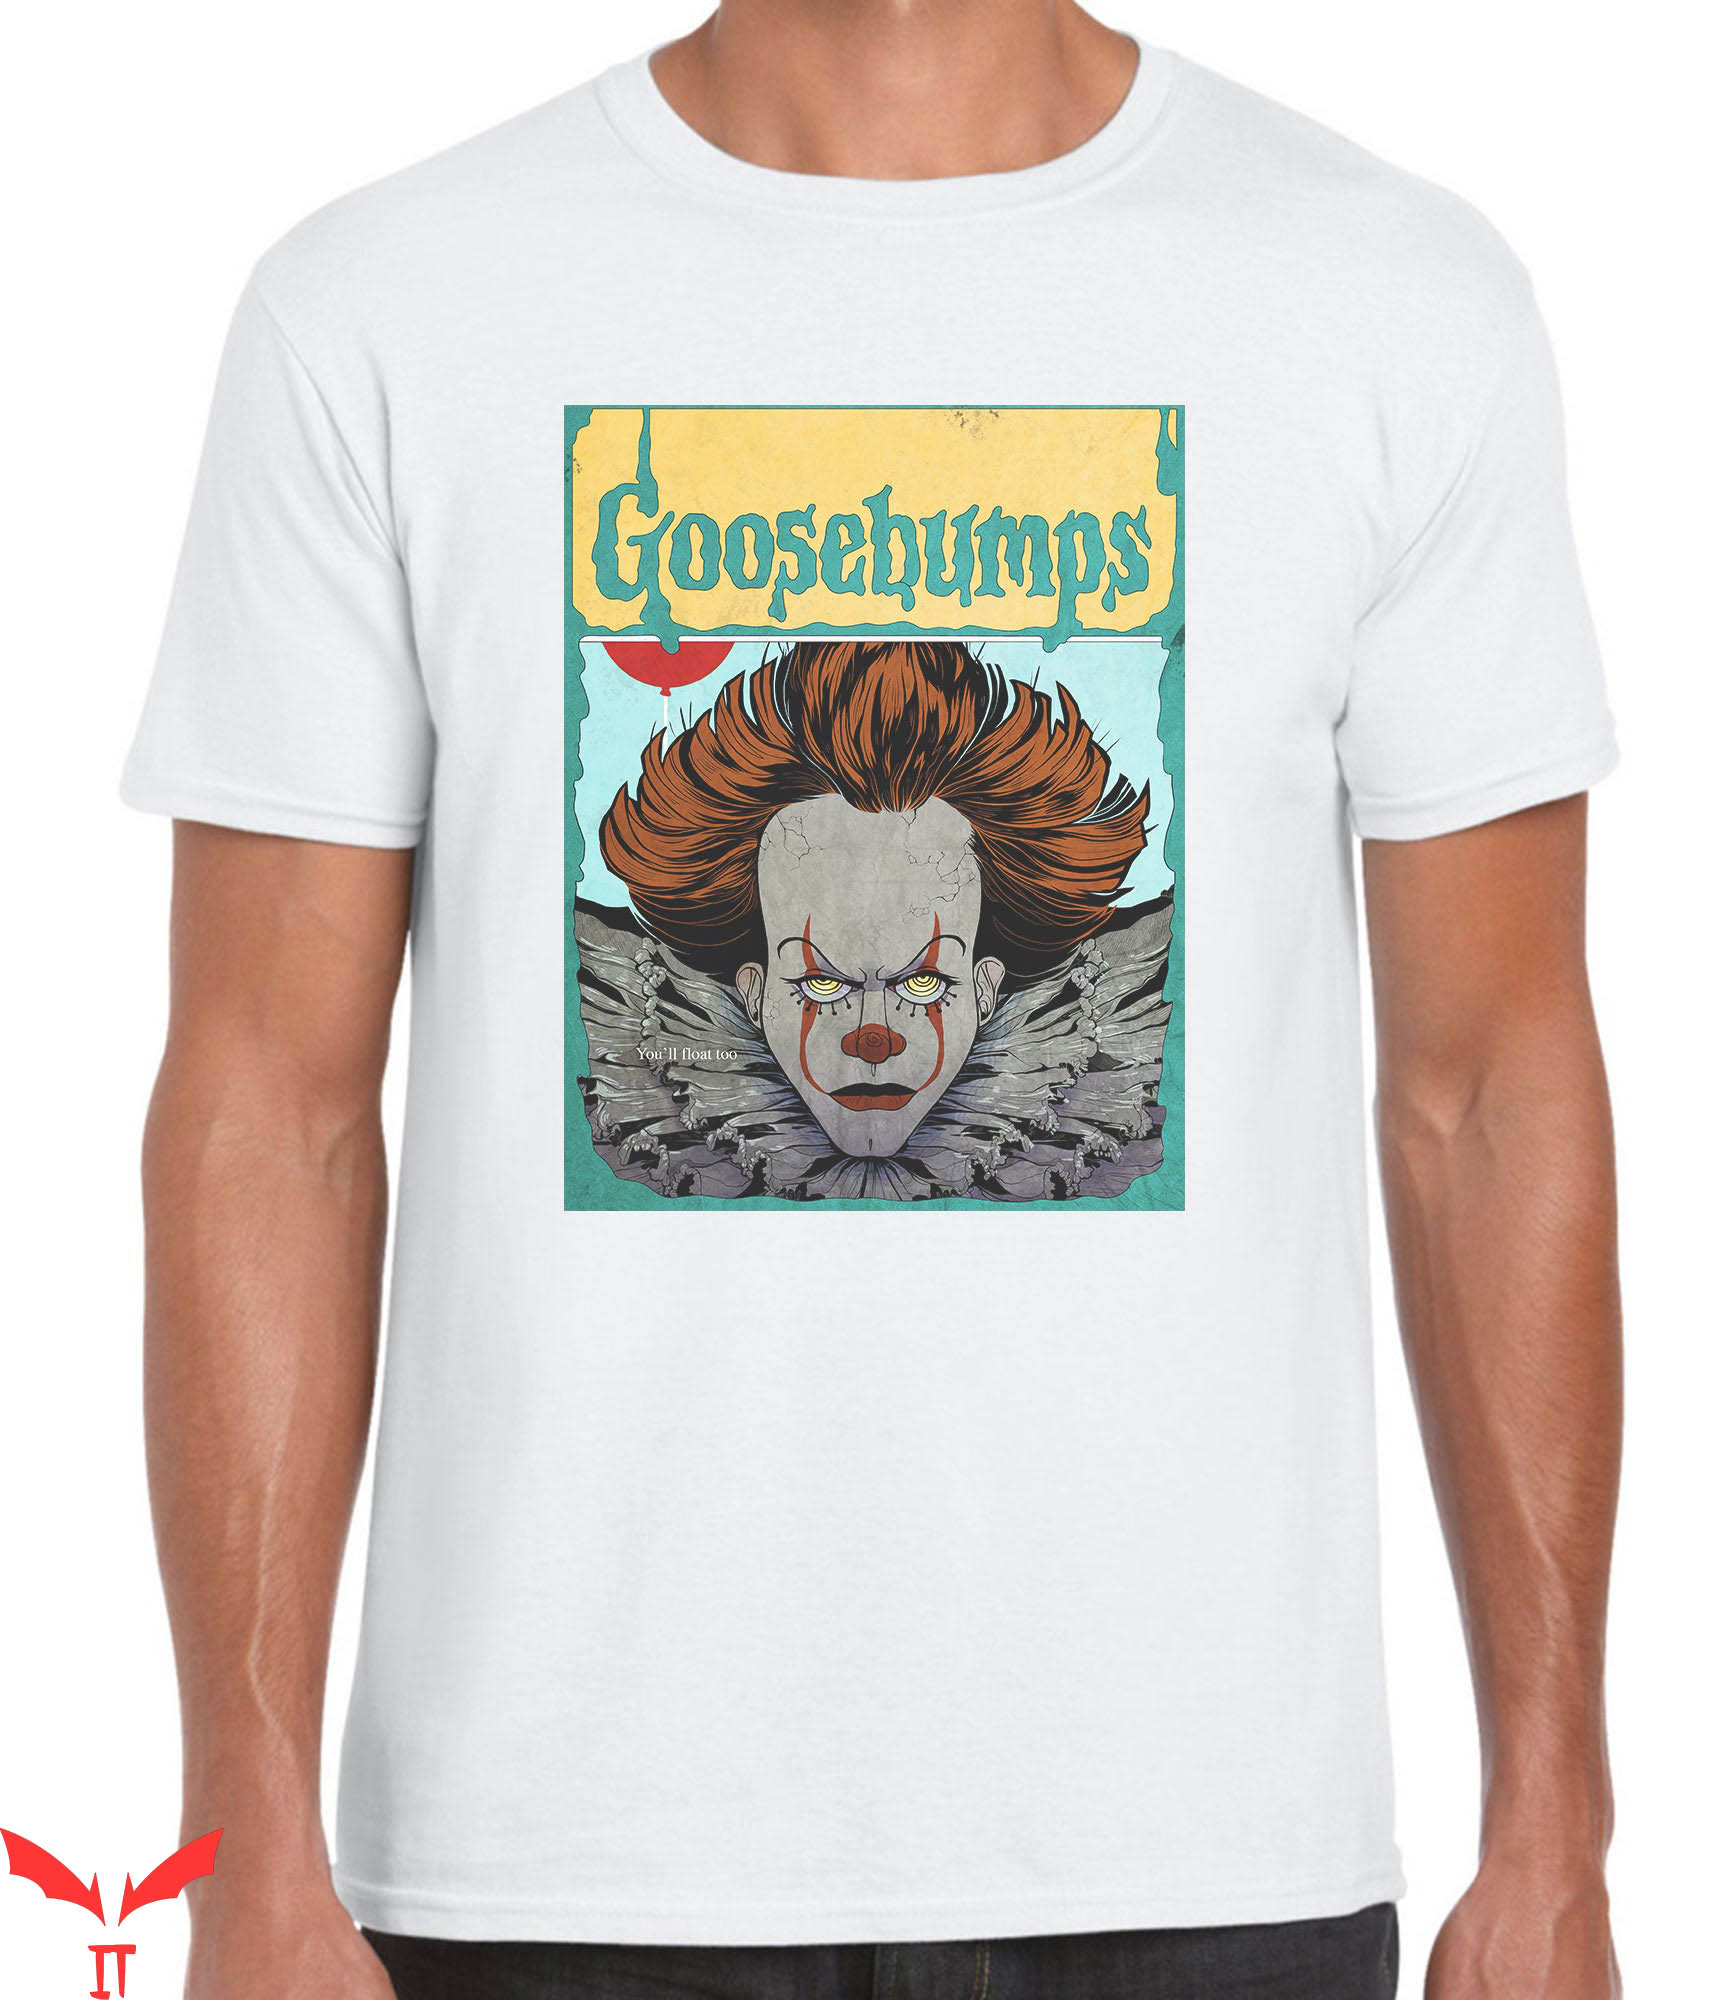 IT T-Shirt You'll Goosebumps Pennywise Horror IT The Movie